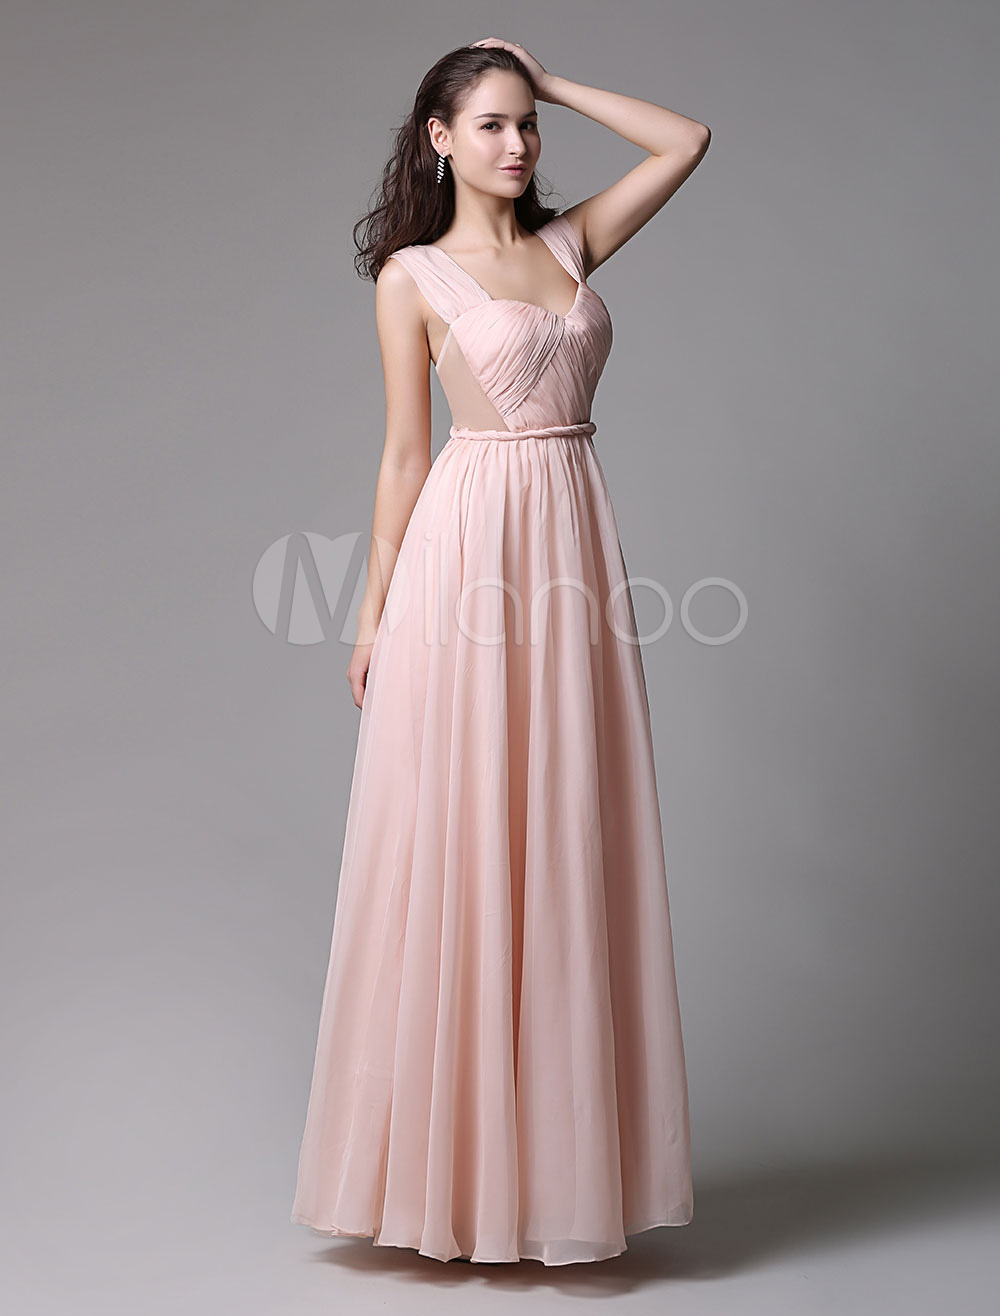 A-Line Pink Chiffon Prom Dress With Sweetheart Neckline and Side Cut ...